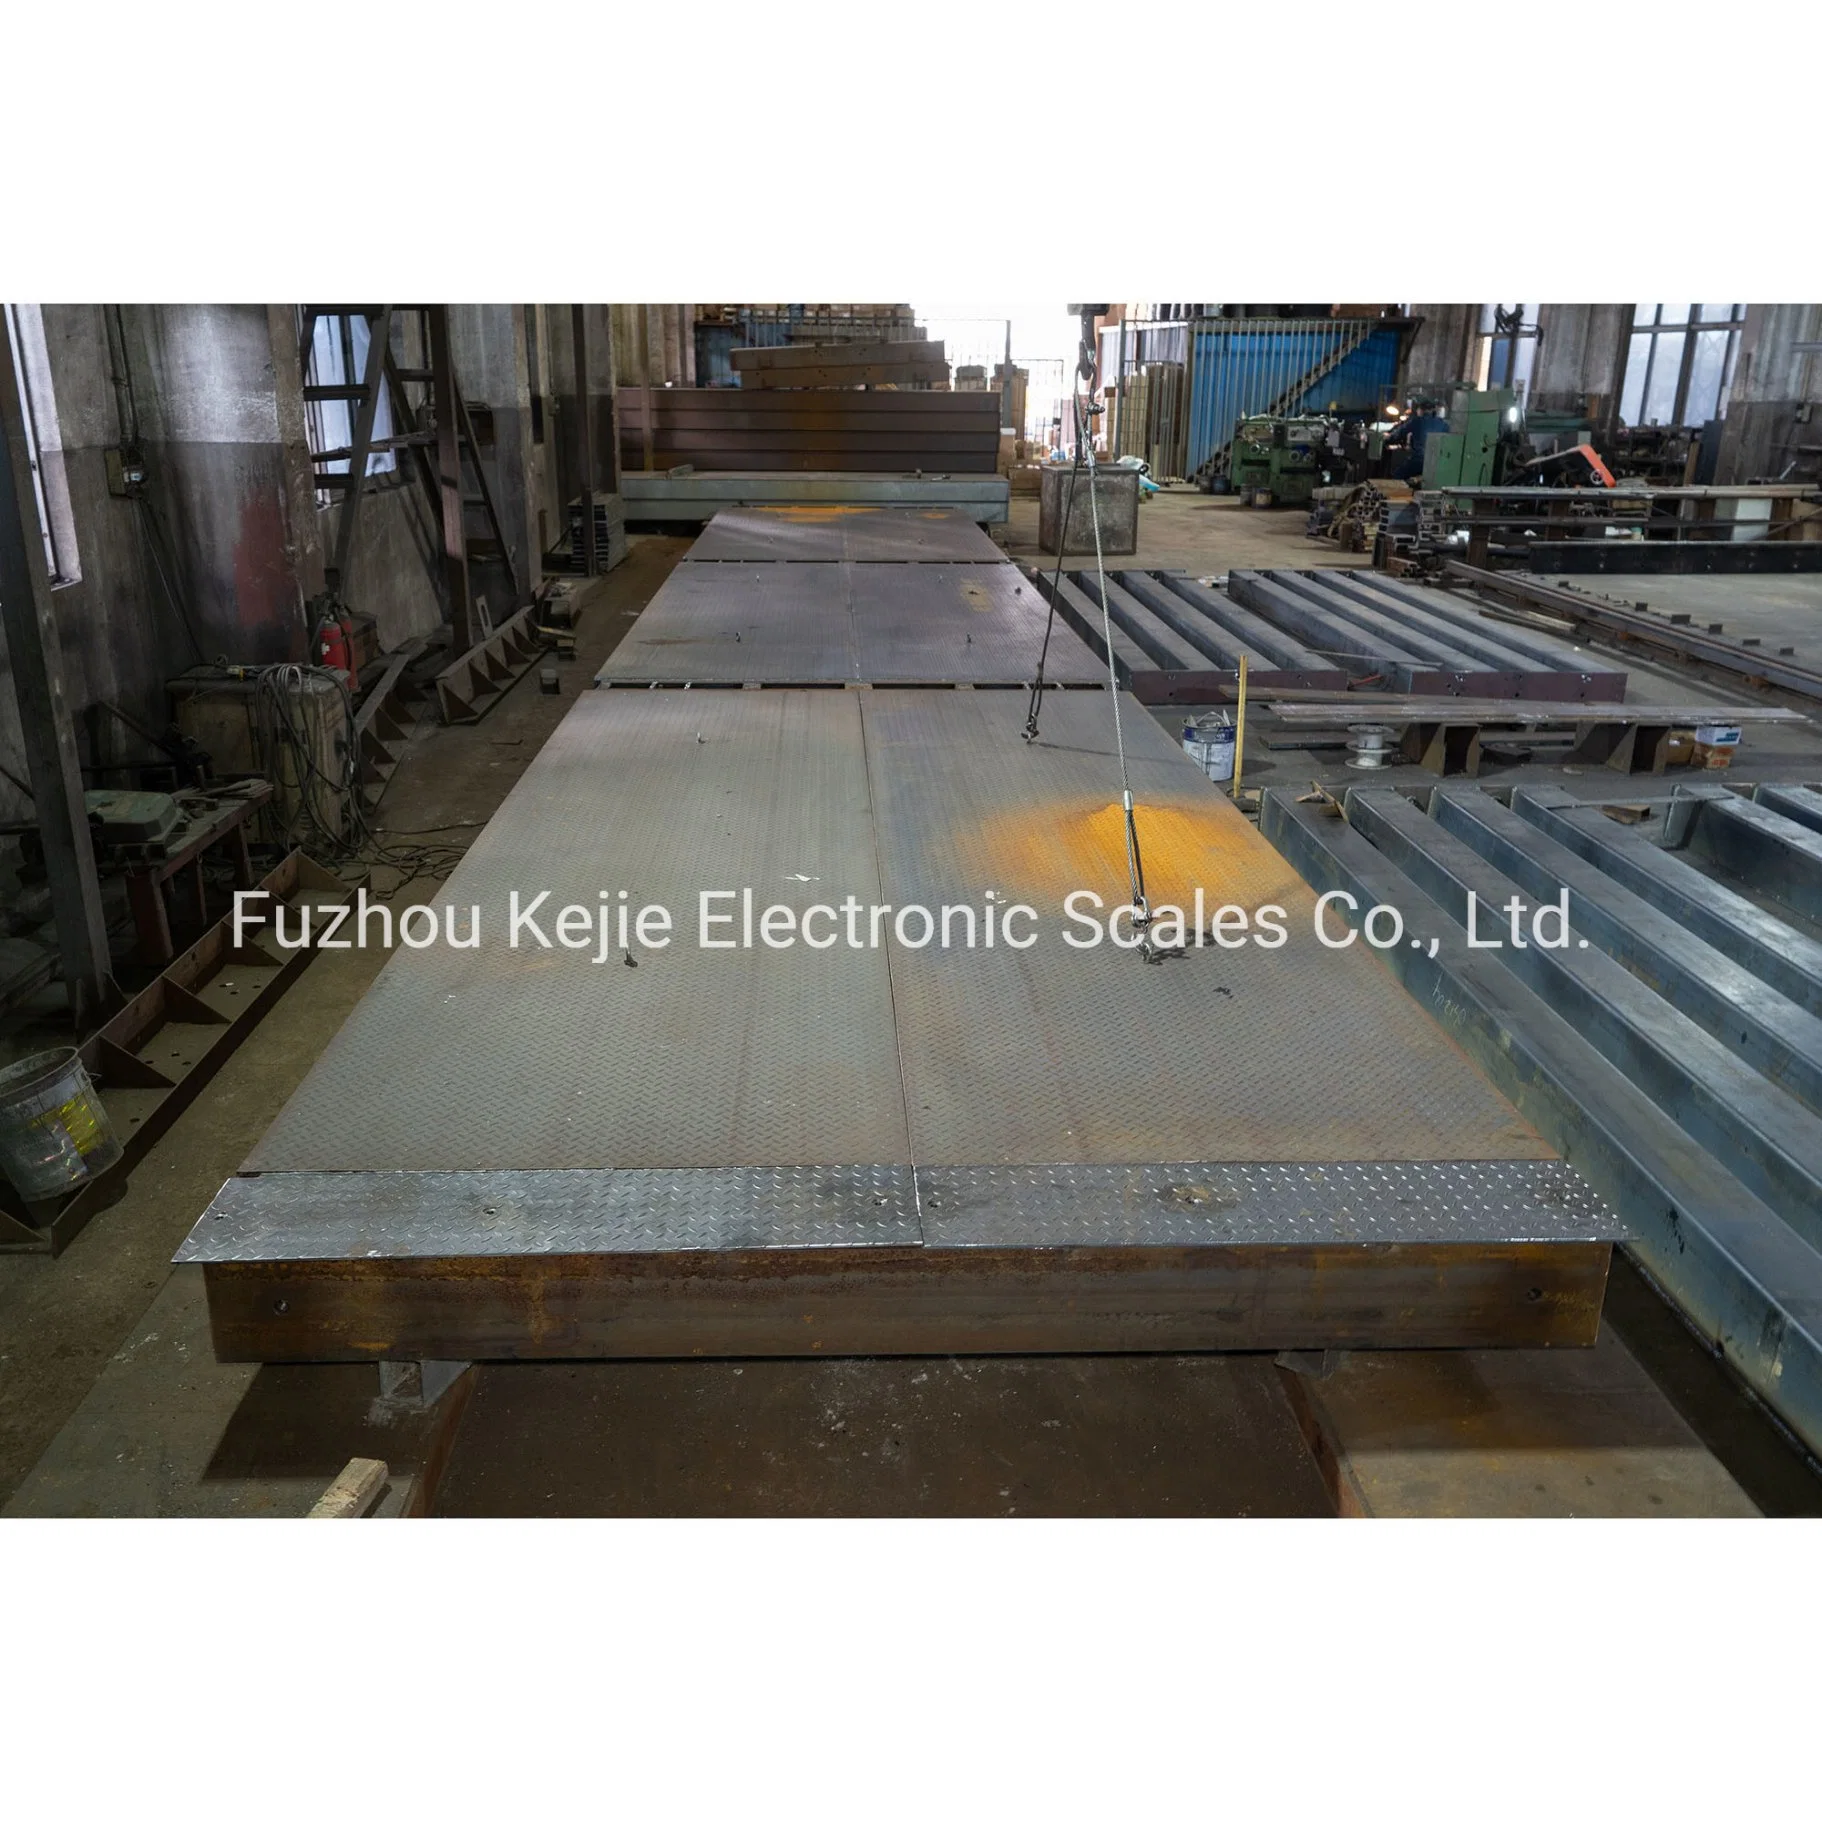 Scs-100t Electroinc Standard Weighbridge/Truck Scale with or Without Load Cell and Indicator From China Kejie Factory for Industrial Application